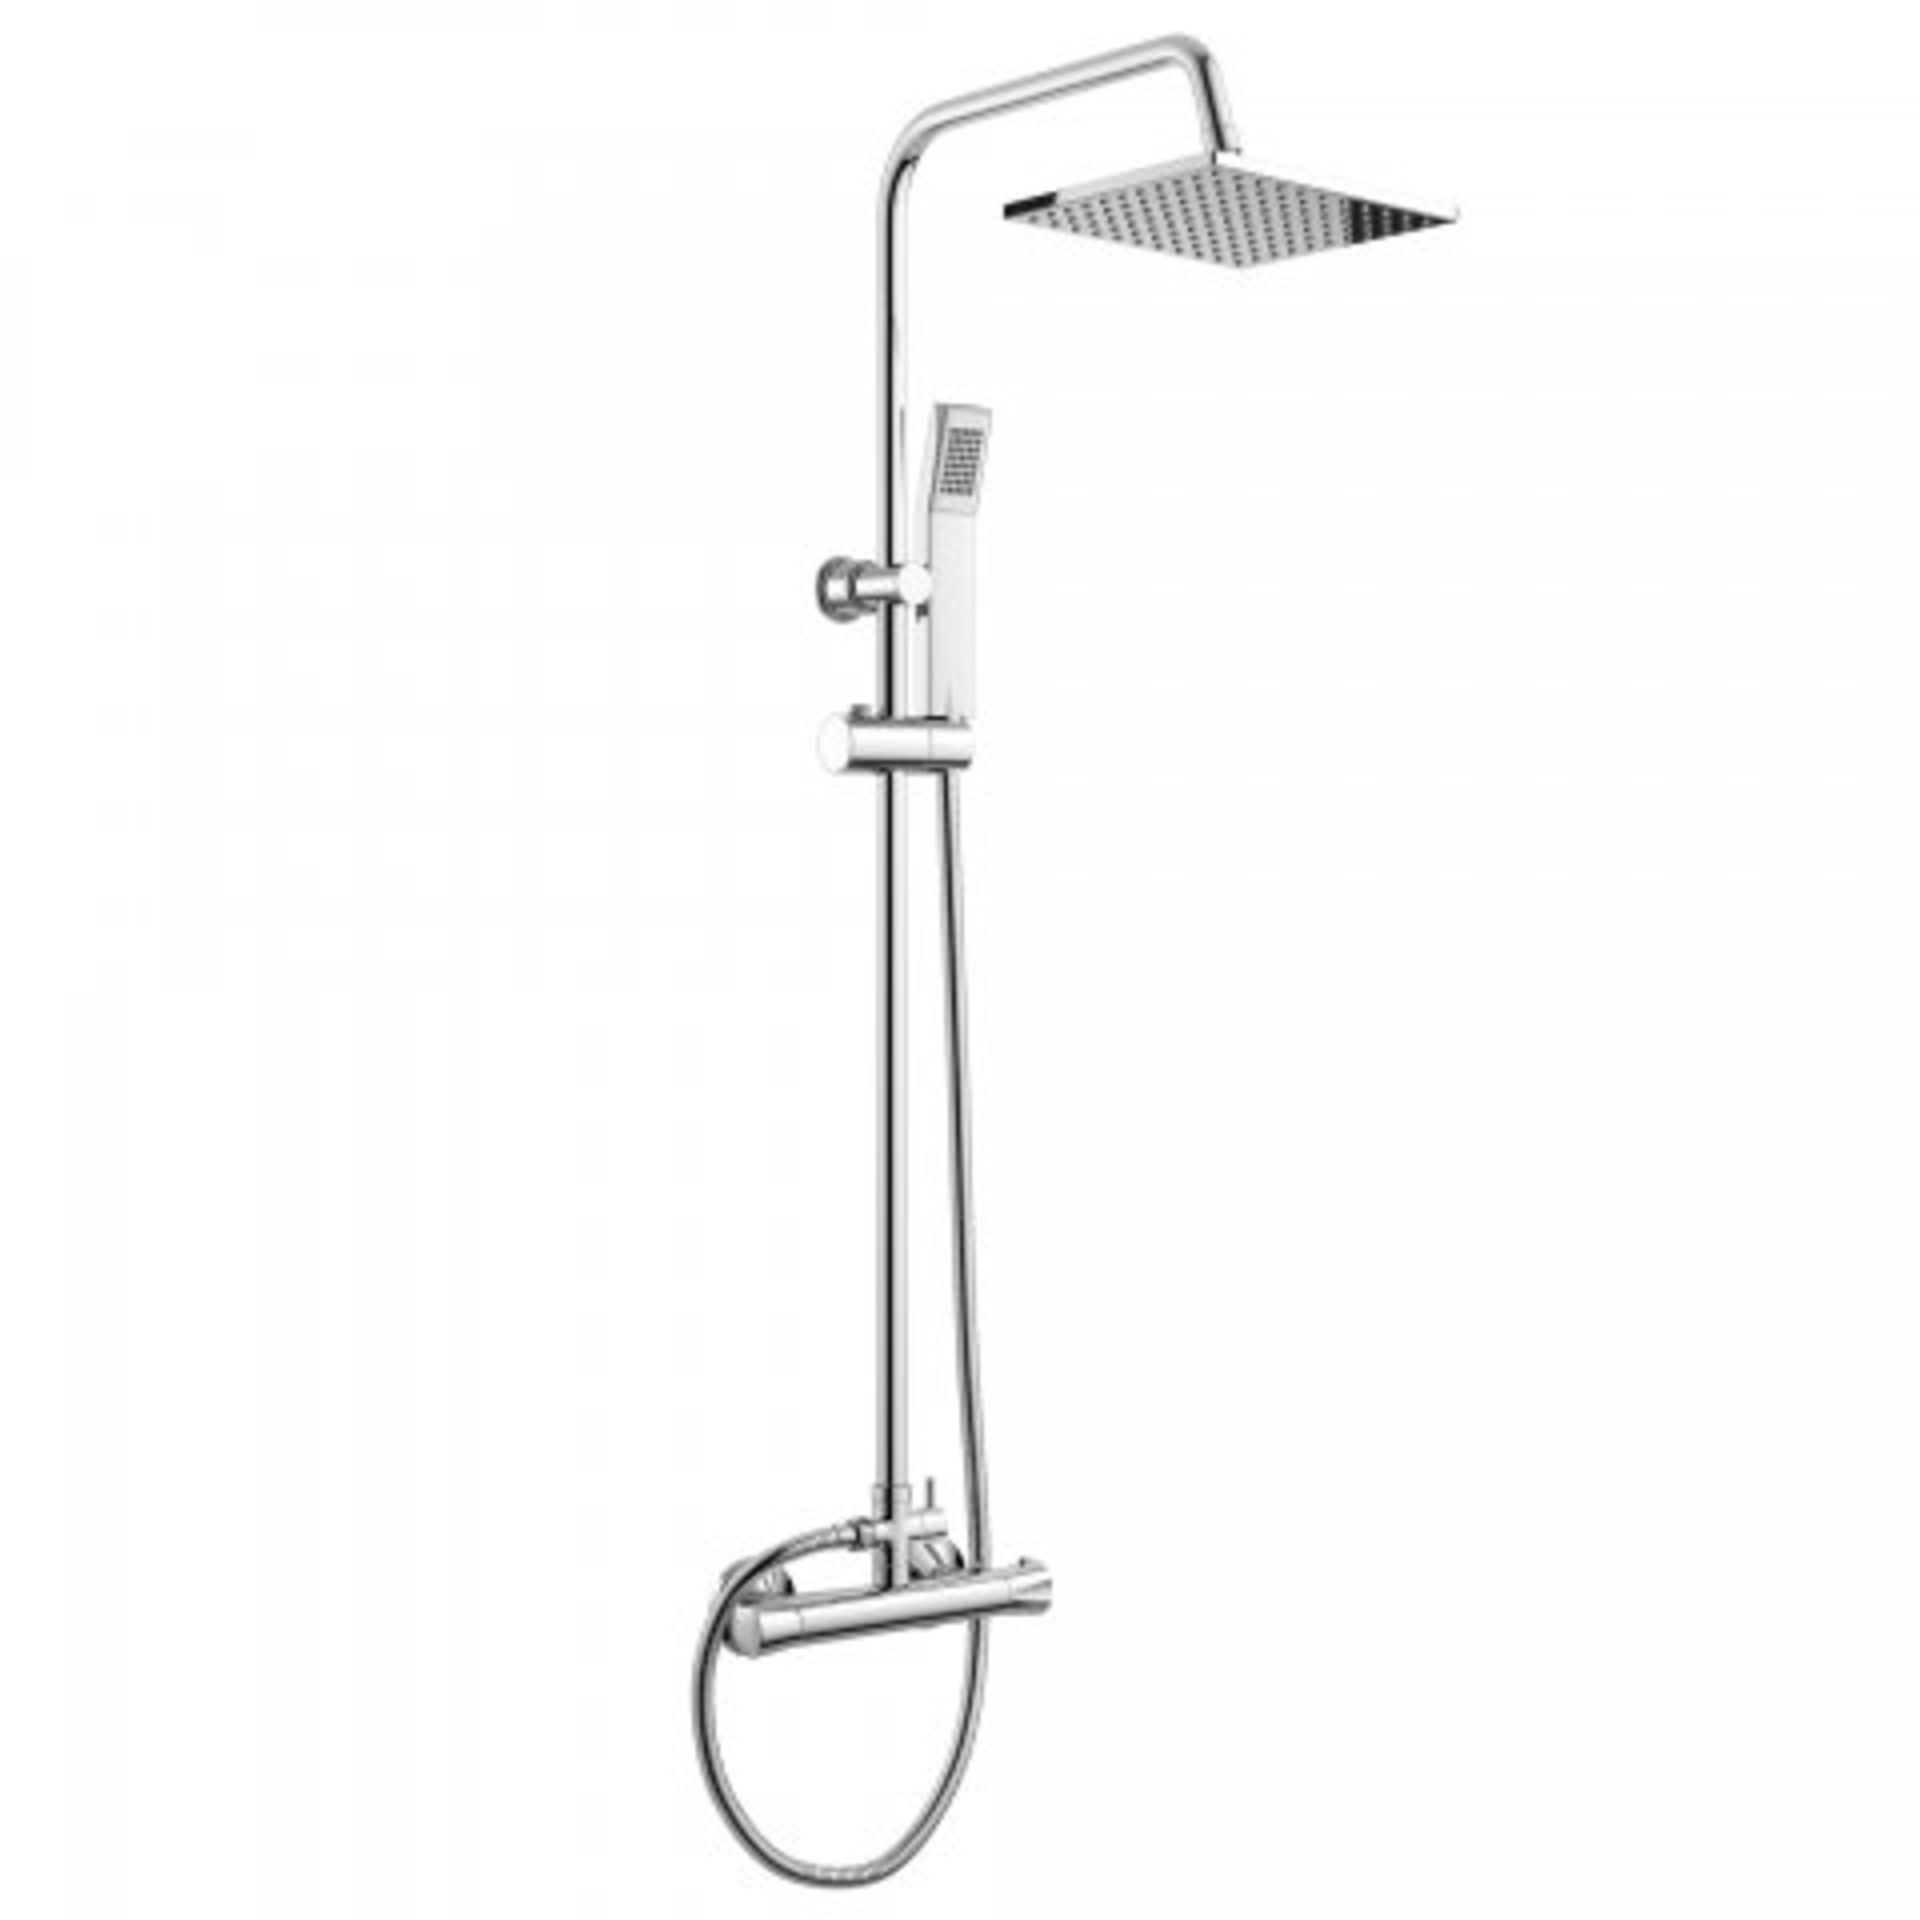 (O41) 200mm Square Head Thermostatic Exposed Shower Kit & Hand Held. RRP £249.99. Simplistic Style - Image 3 of 5